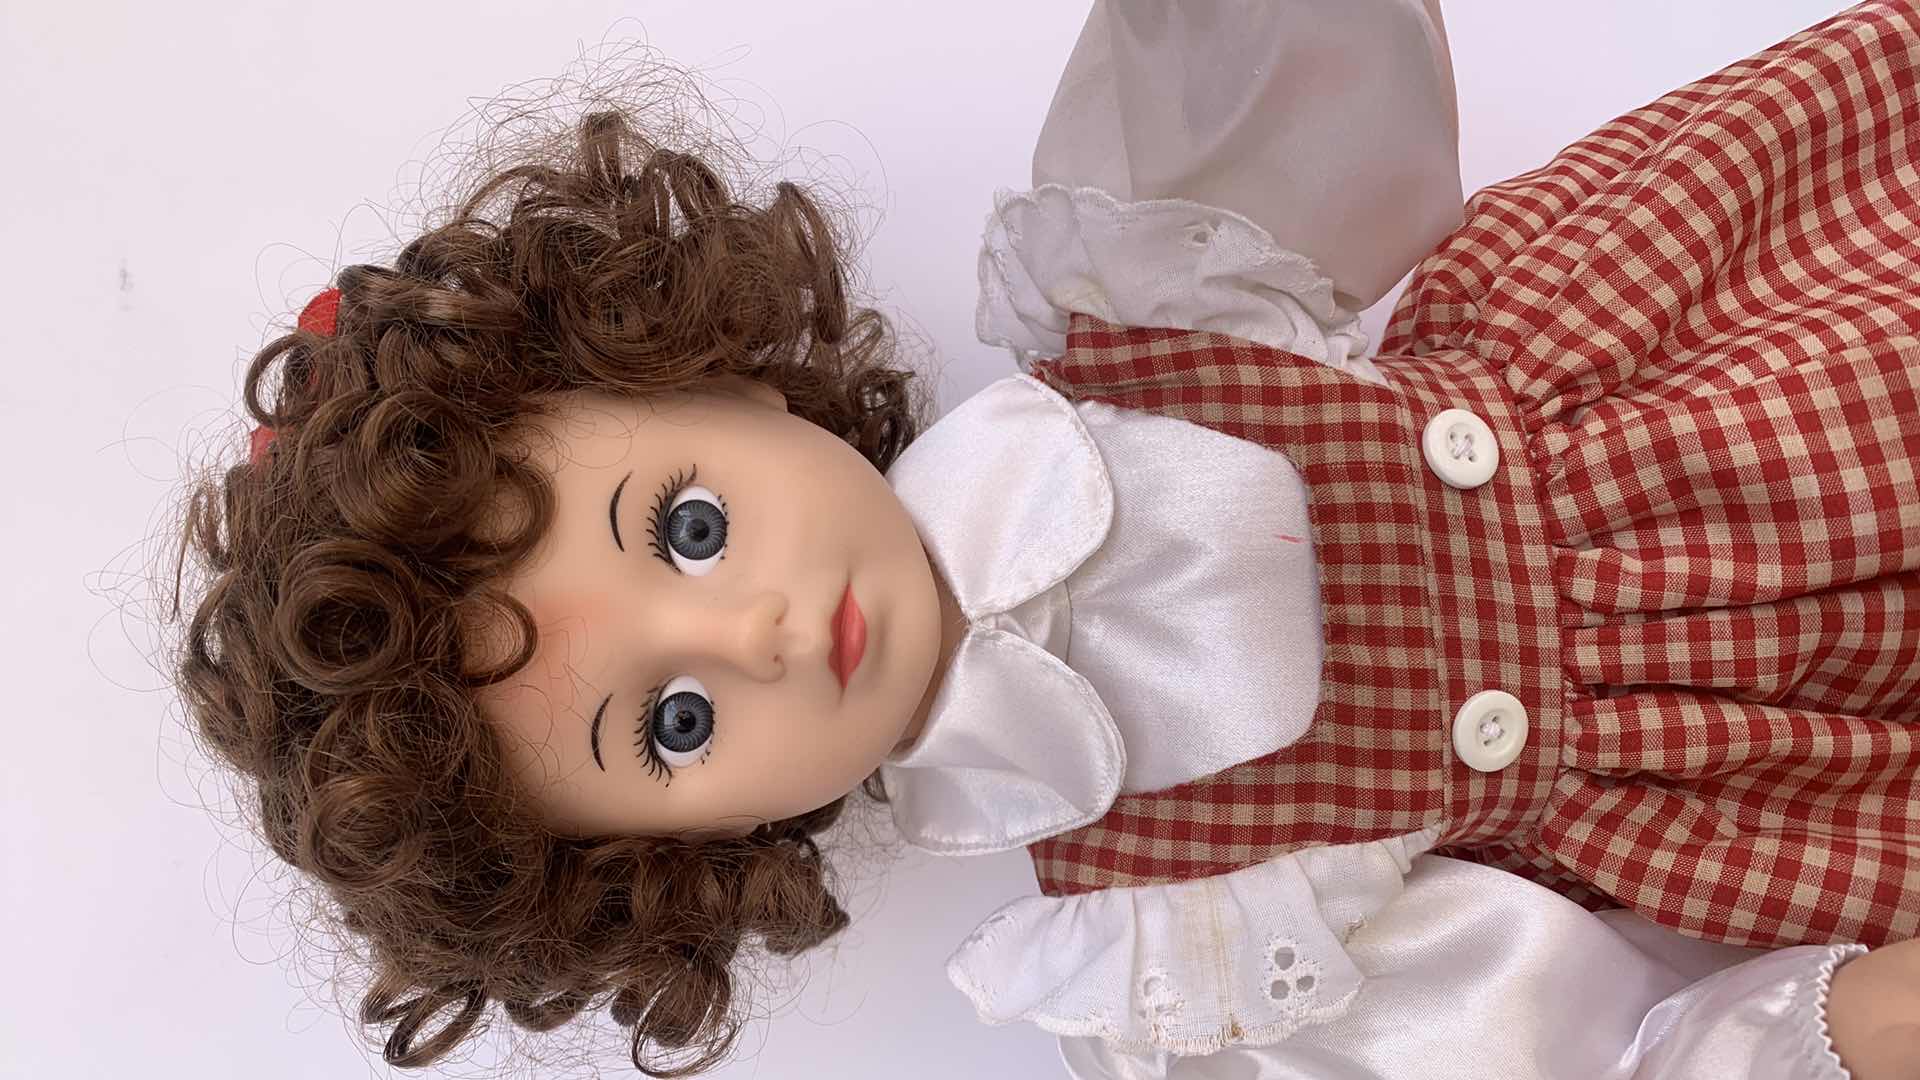 Photo 2 of VINTAGE LIGHT UP GIRL DOLL IN RED CHECK DRESS, LIGHT UP H 21 “